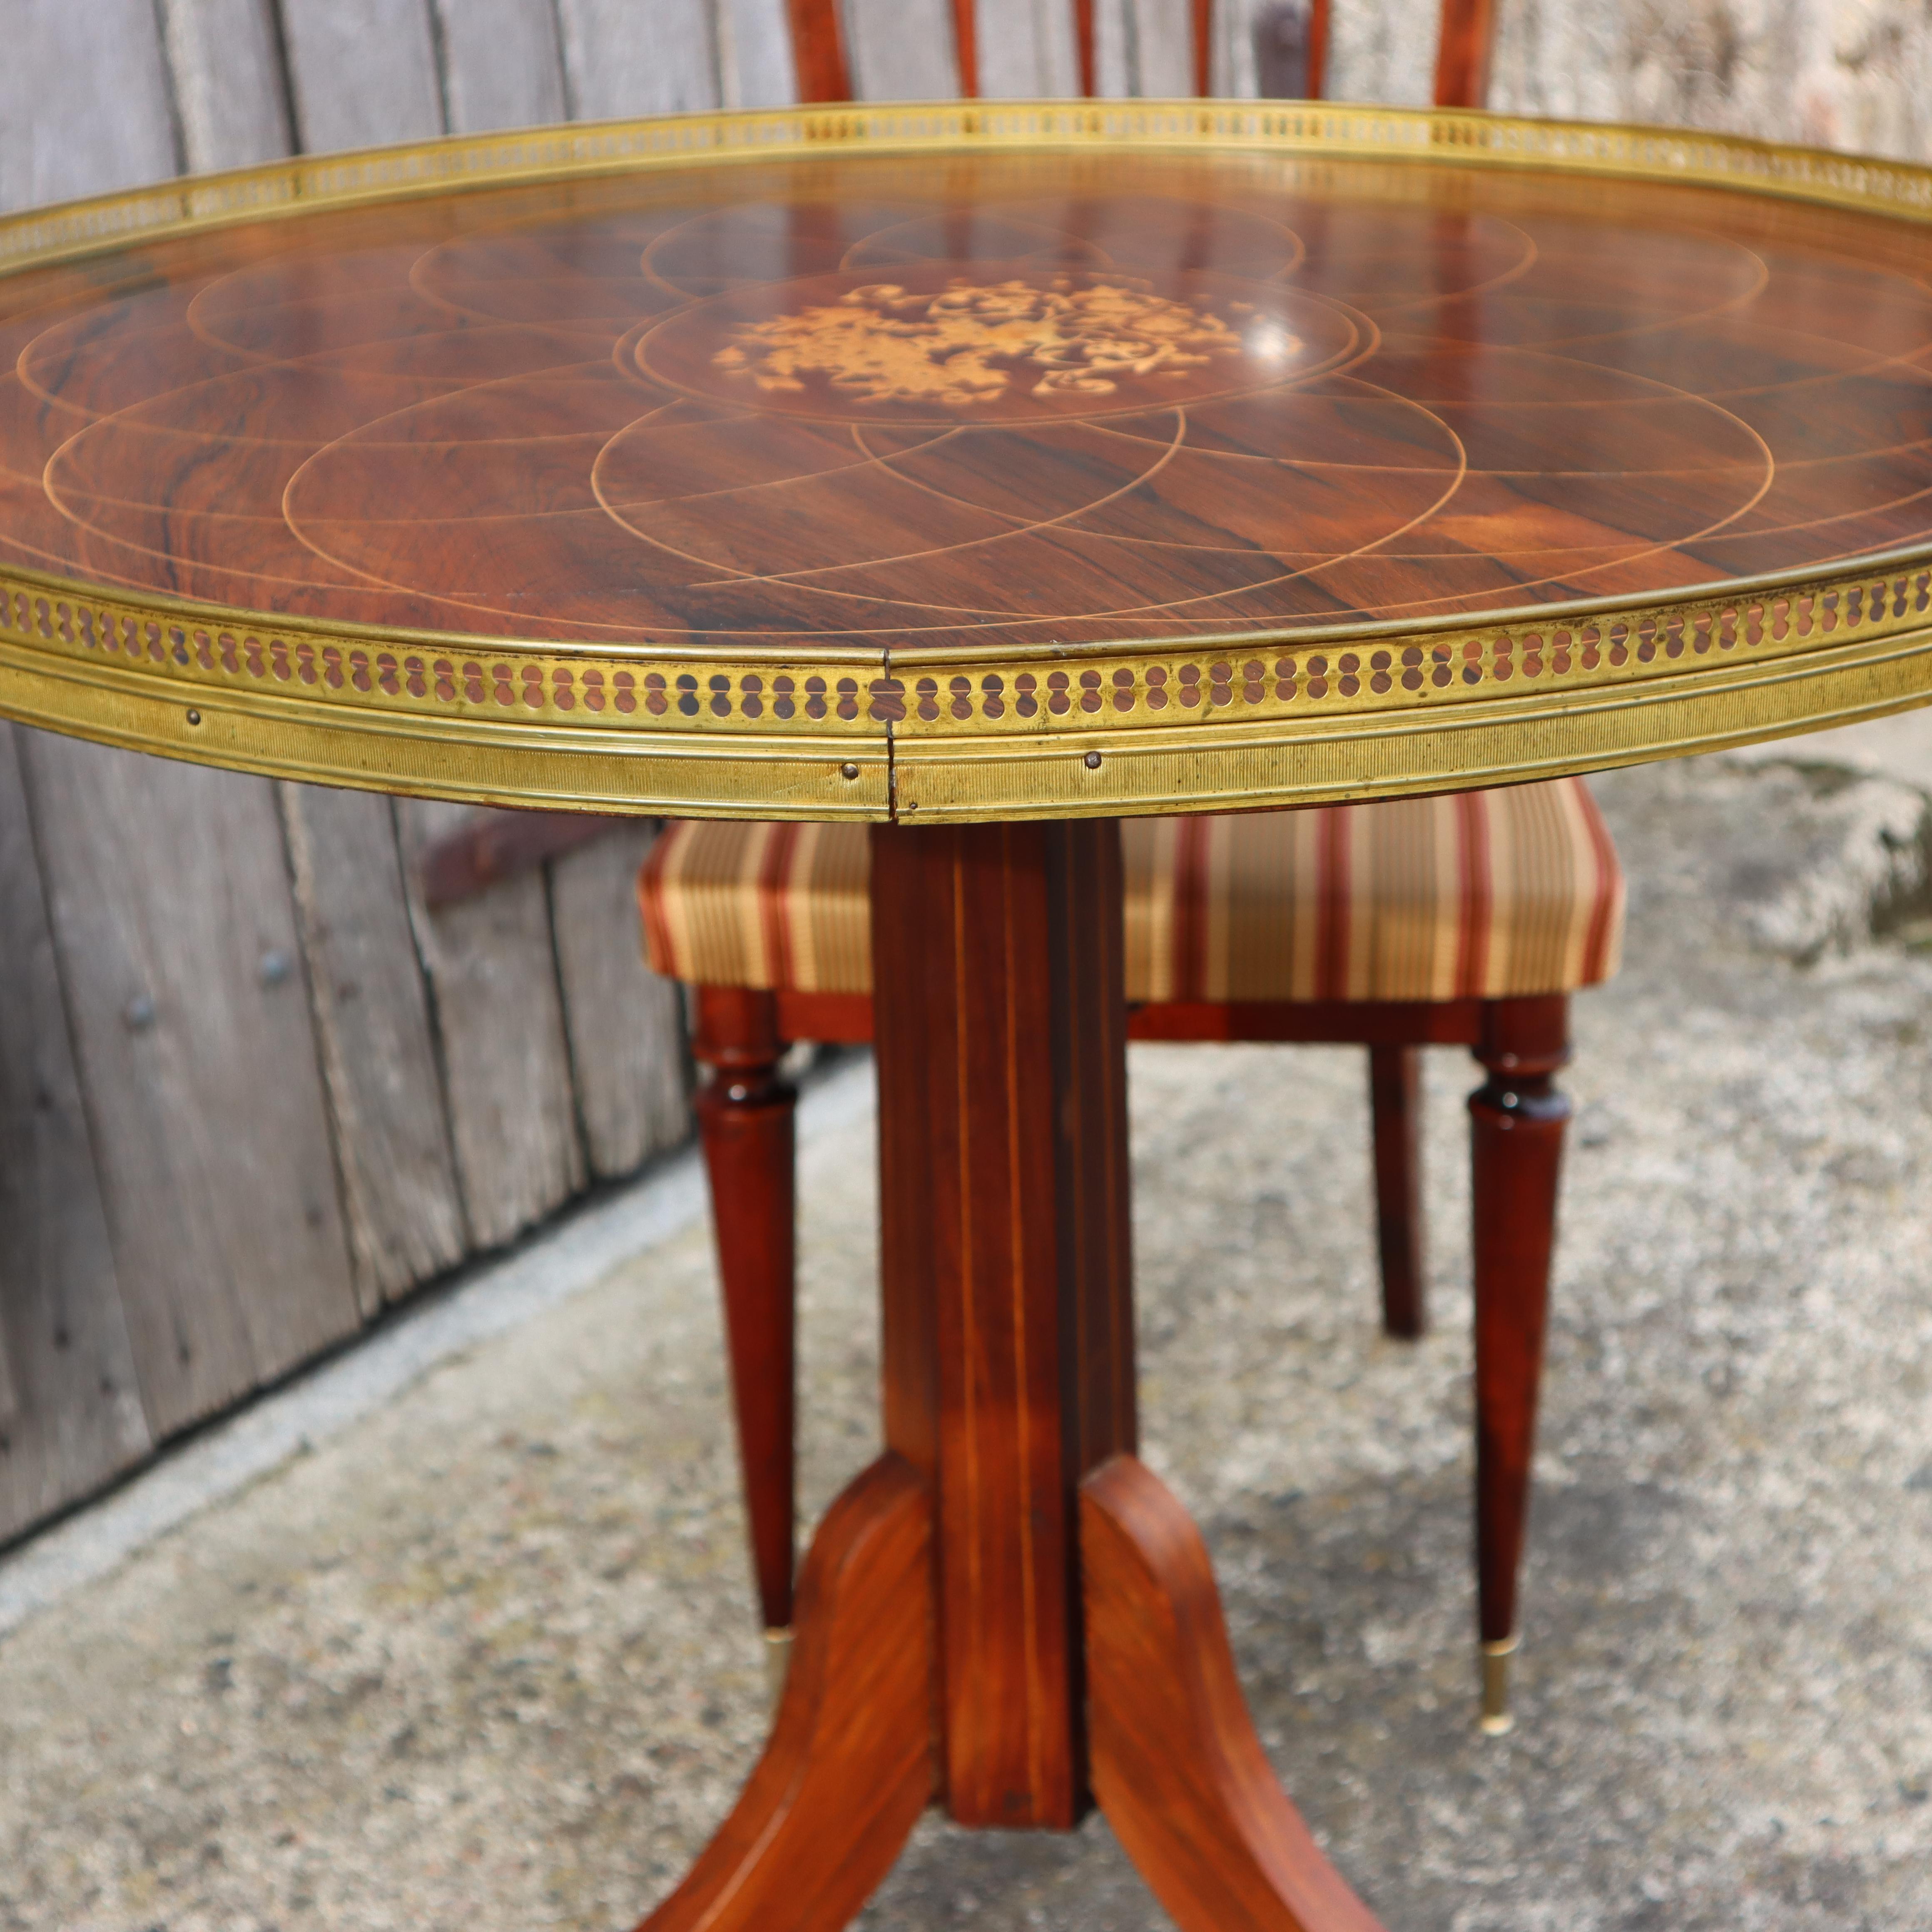 Vintage Neoclassical  Pedestal Table- Inlay work - Brass Gallery-60s For Sale 3